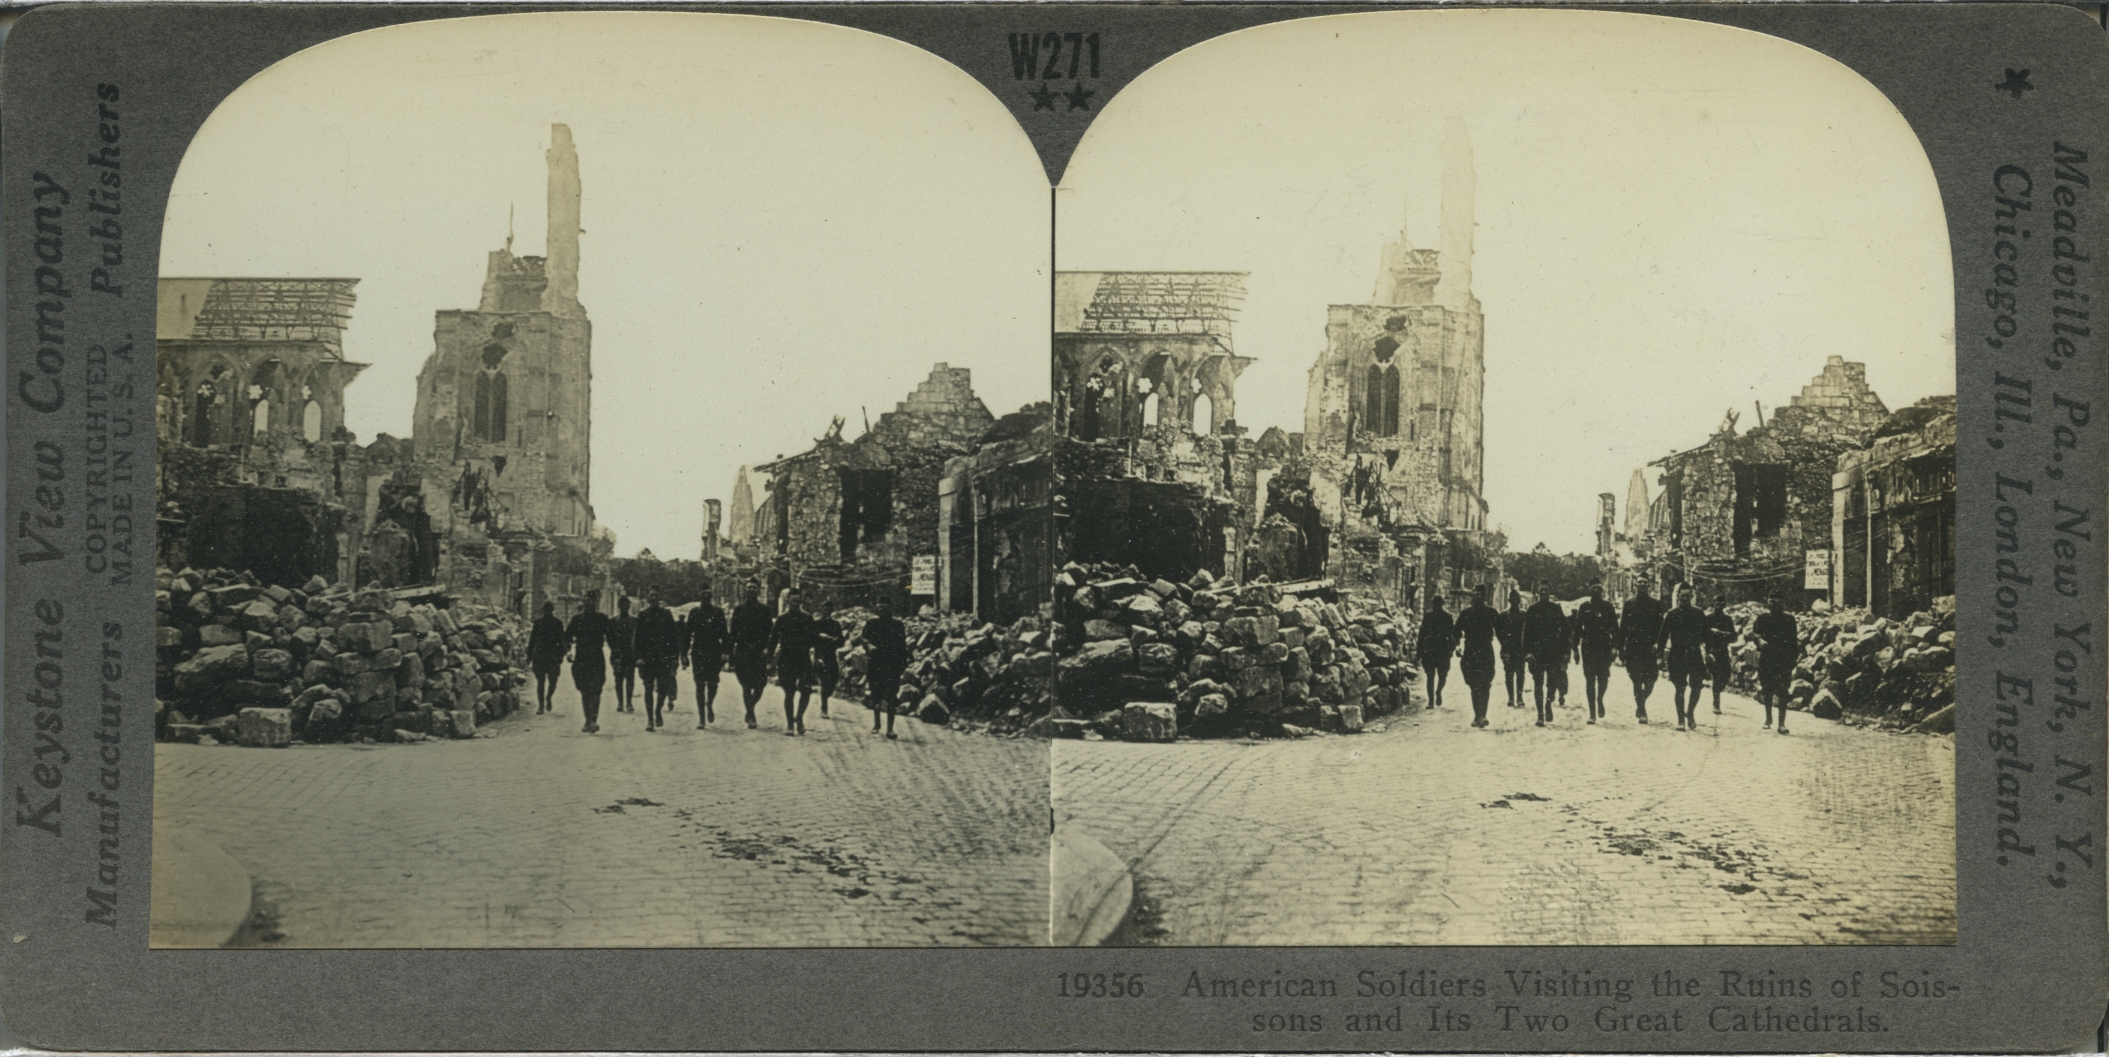 American Soldiers Visiting the Ruins of Soissons and Its Two Great Cathedrals